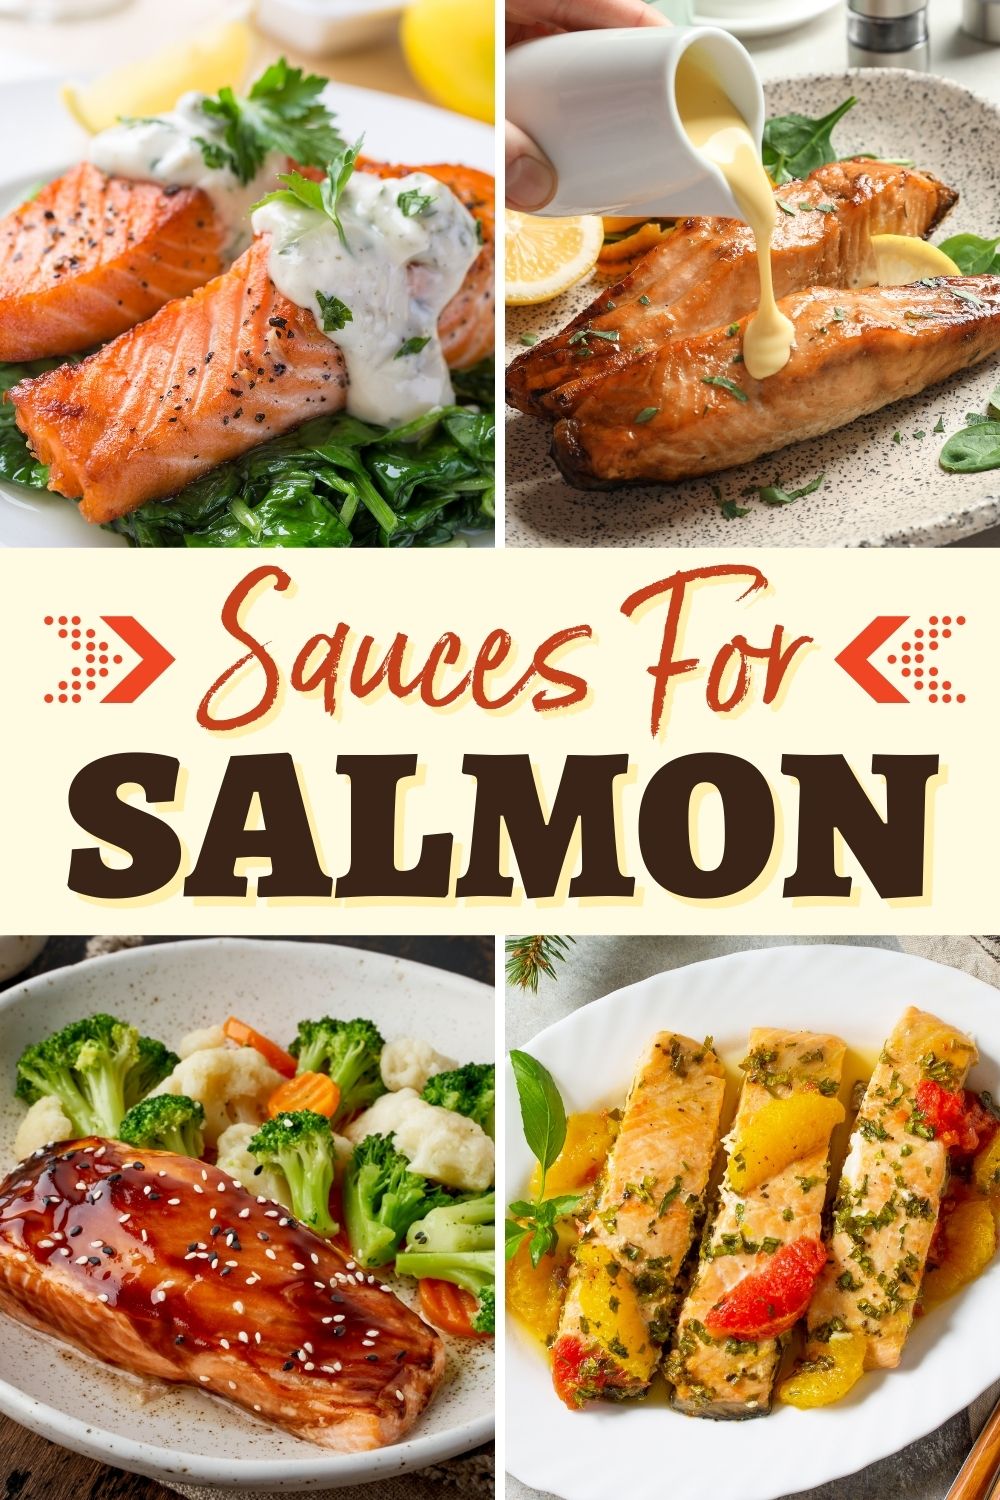 10 Best Sauces for Salmon (+ Easy Recipes) - Insanely Good